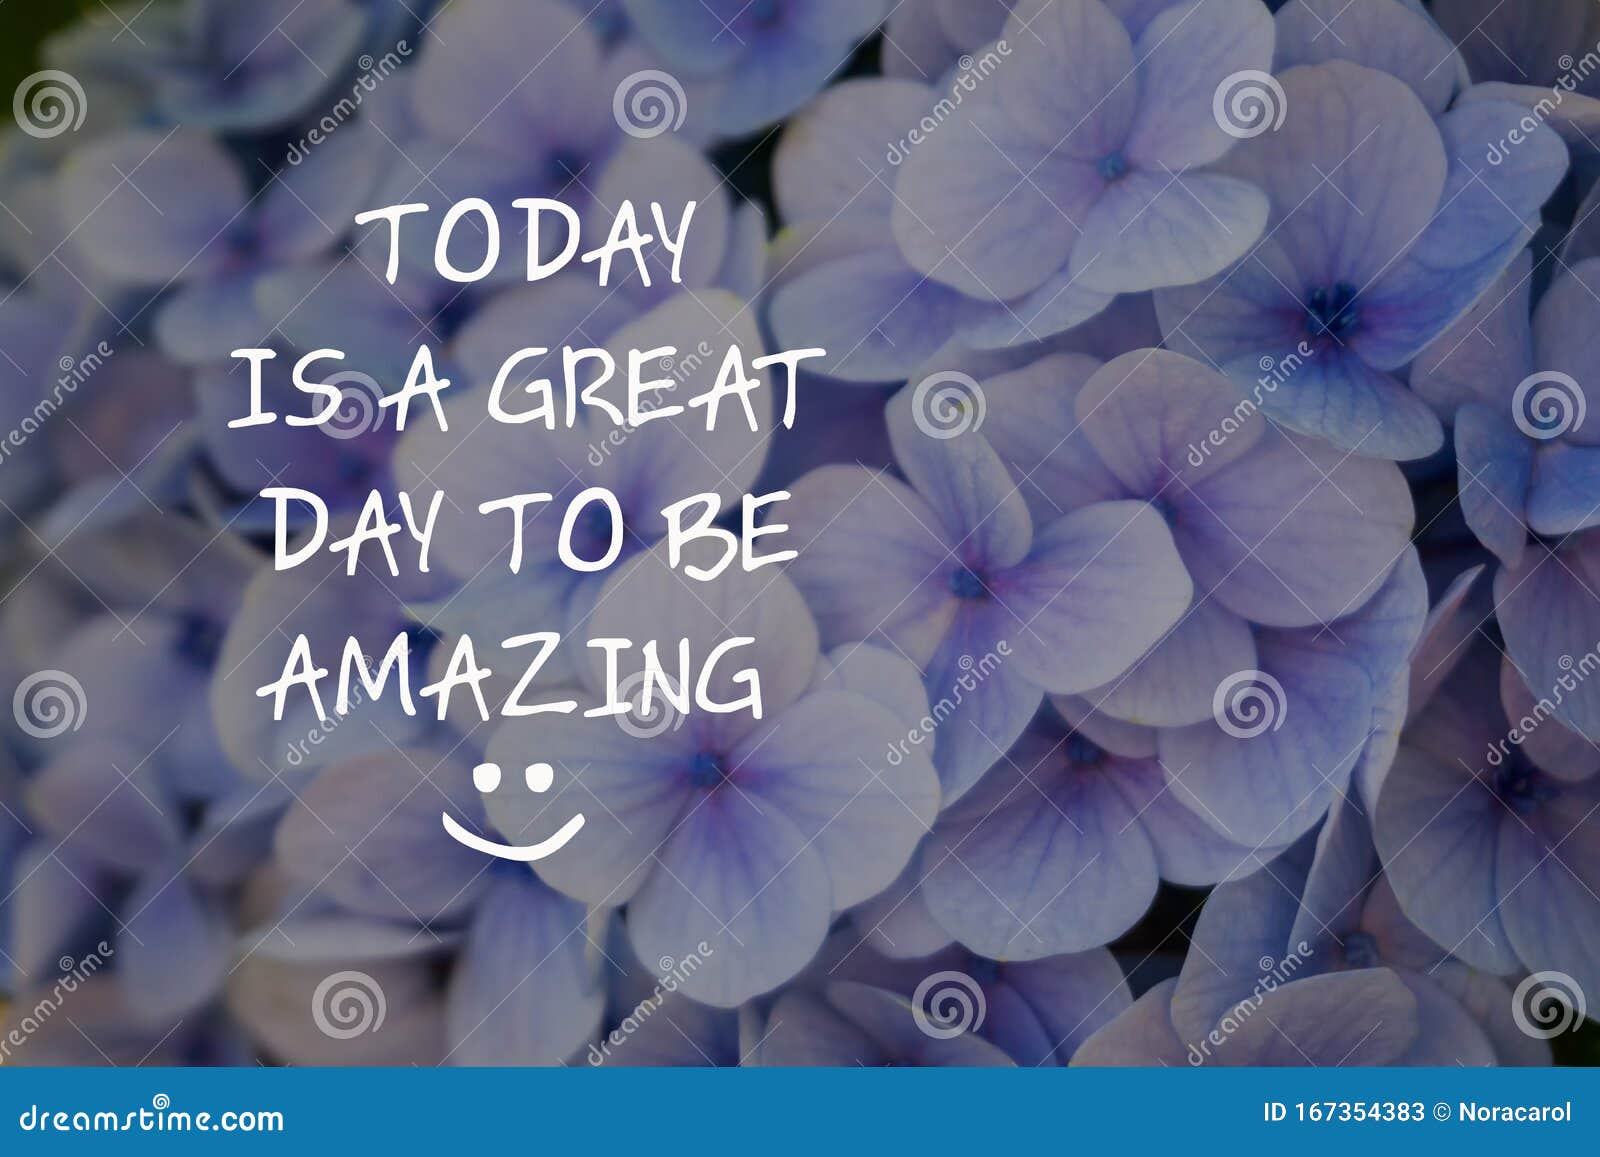 inspirational quotes - today is a great day to be amazing